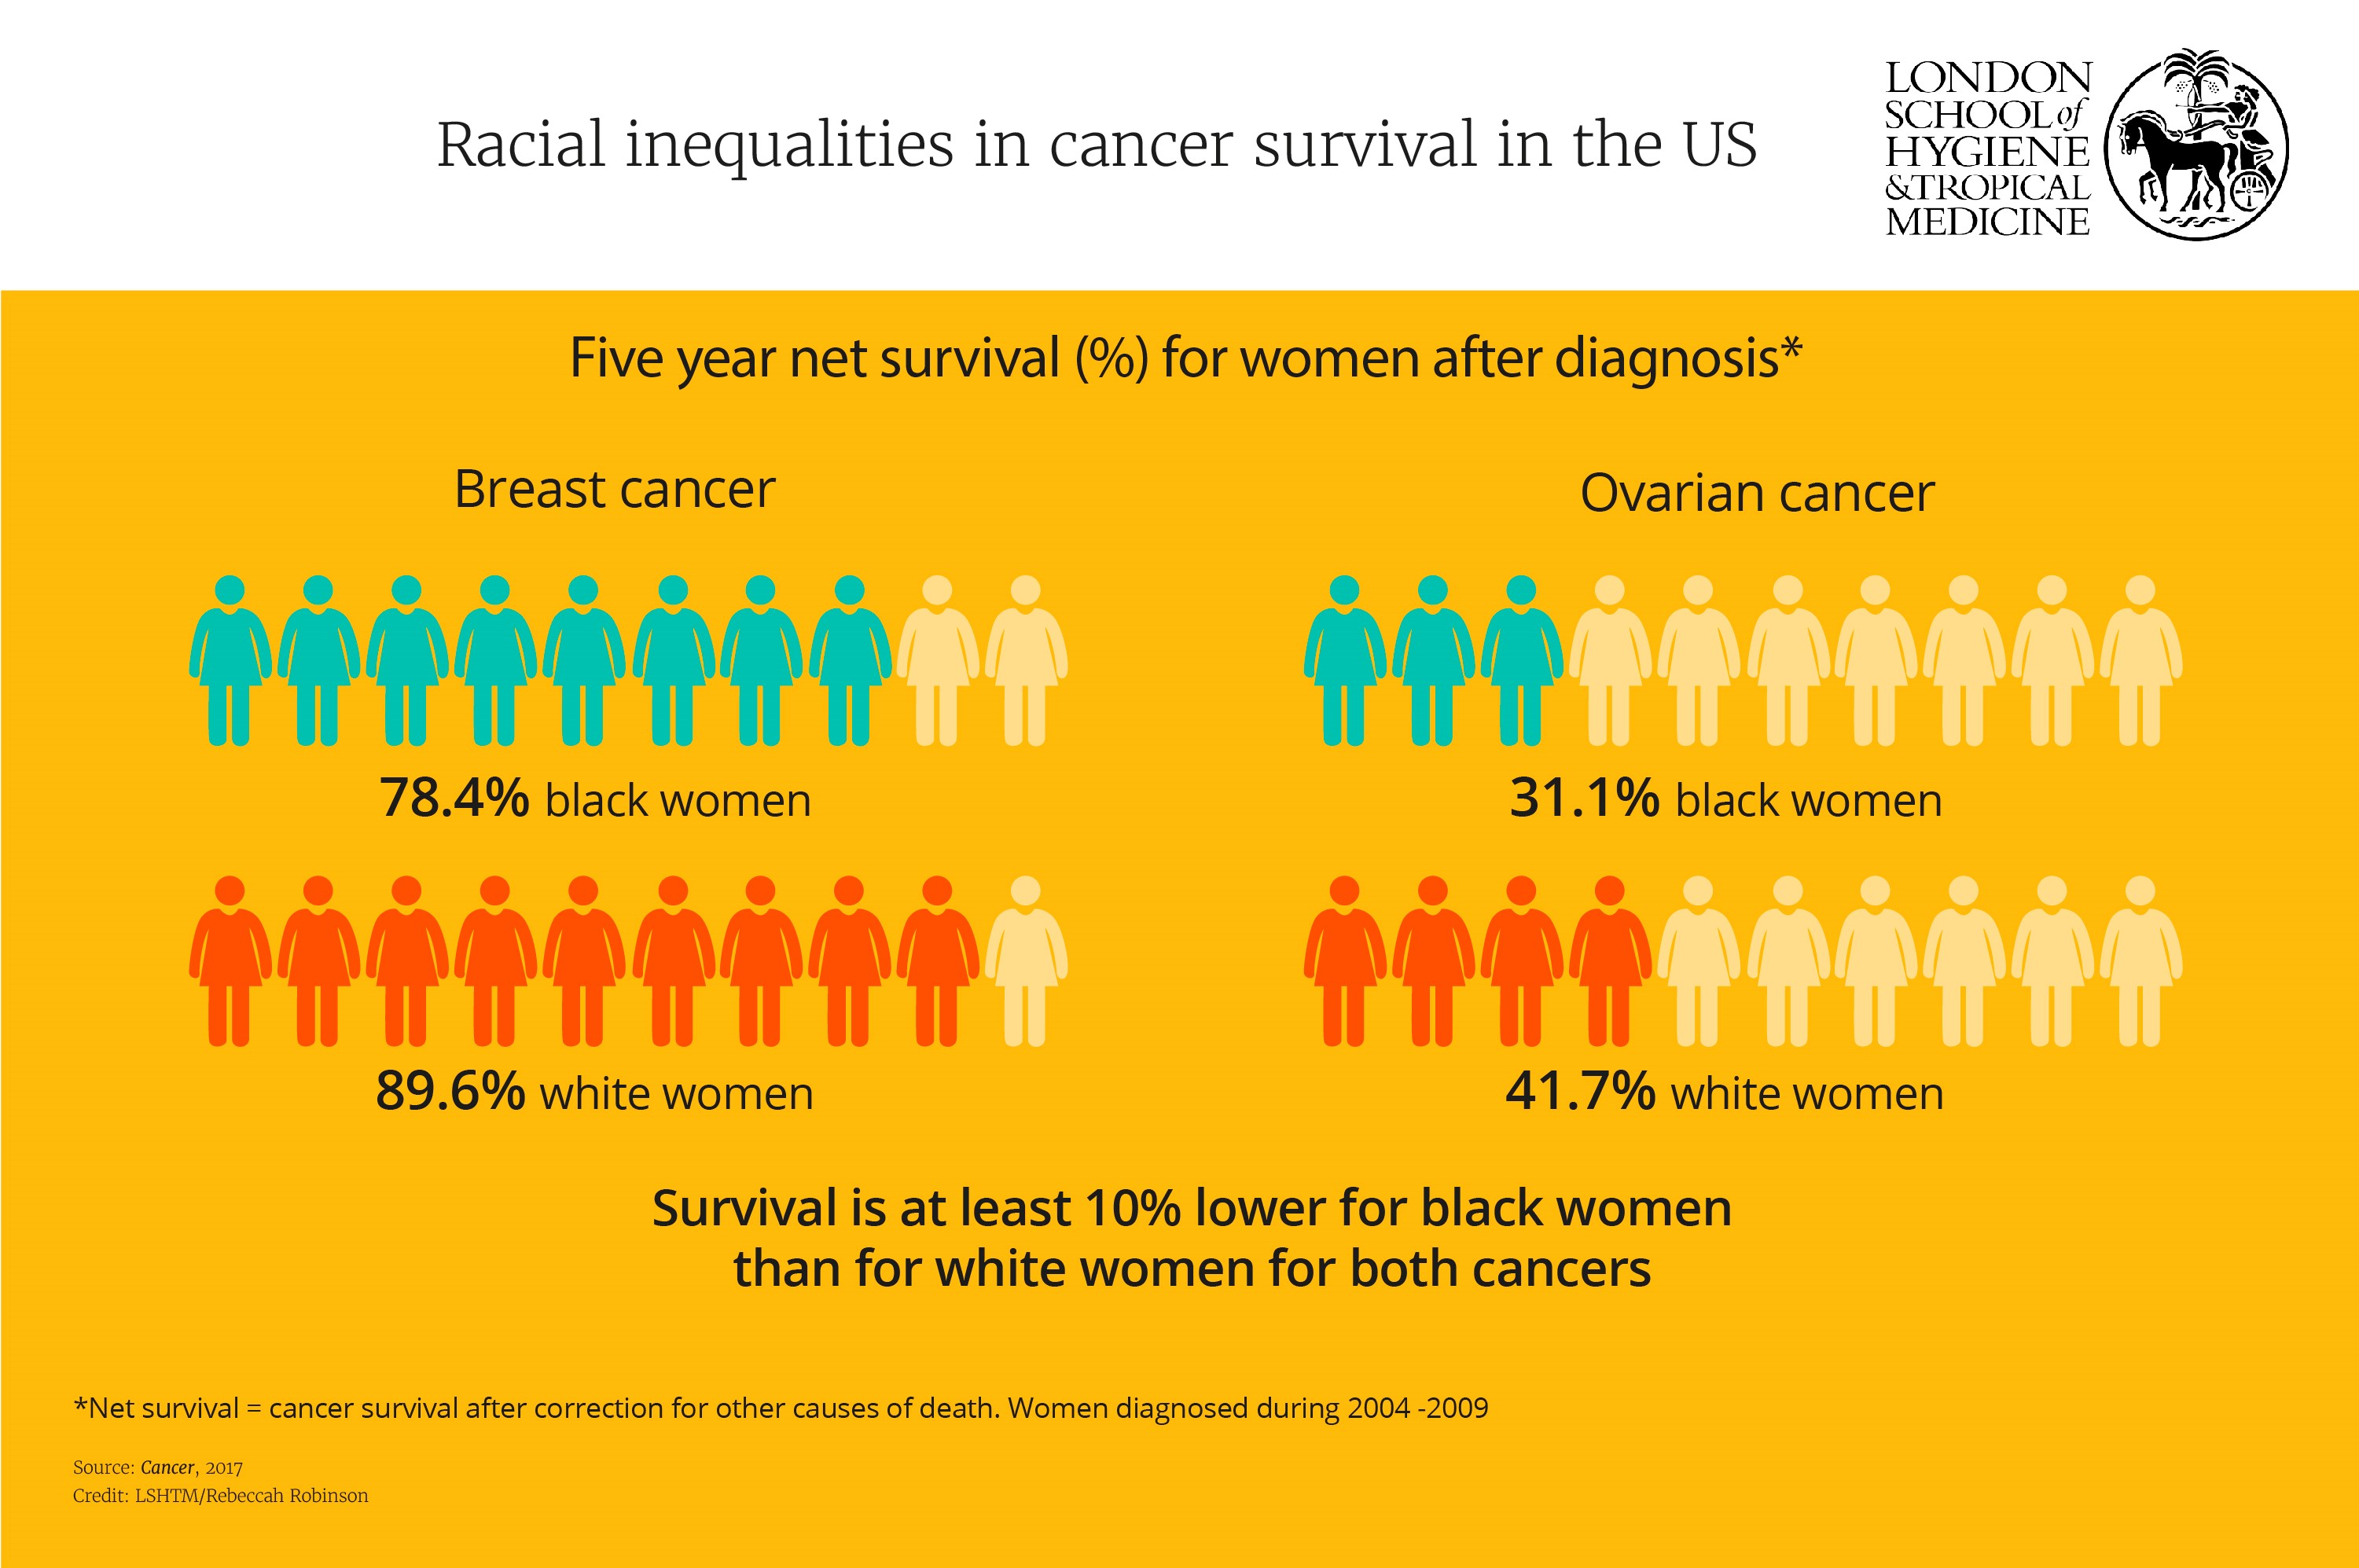 Racial inequalities in cancer survival in the US